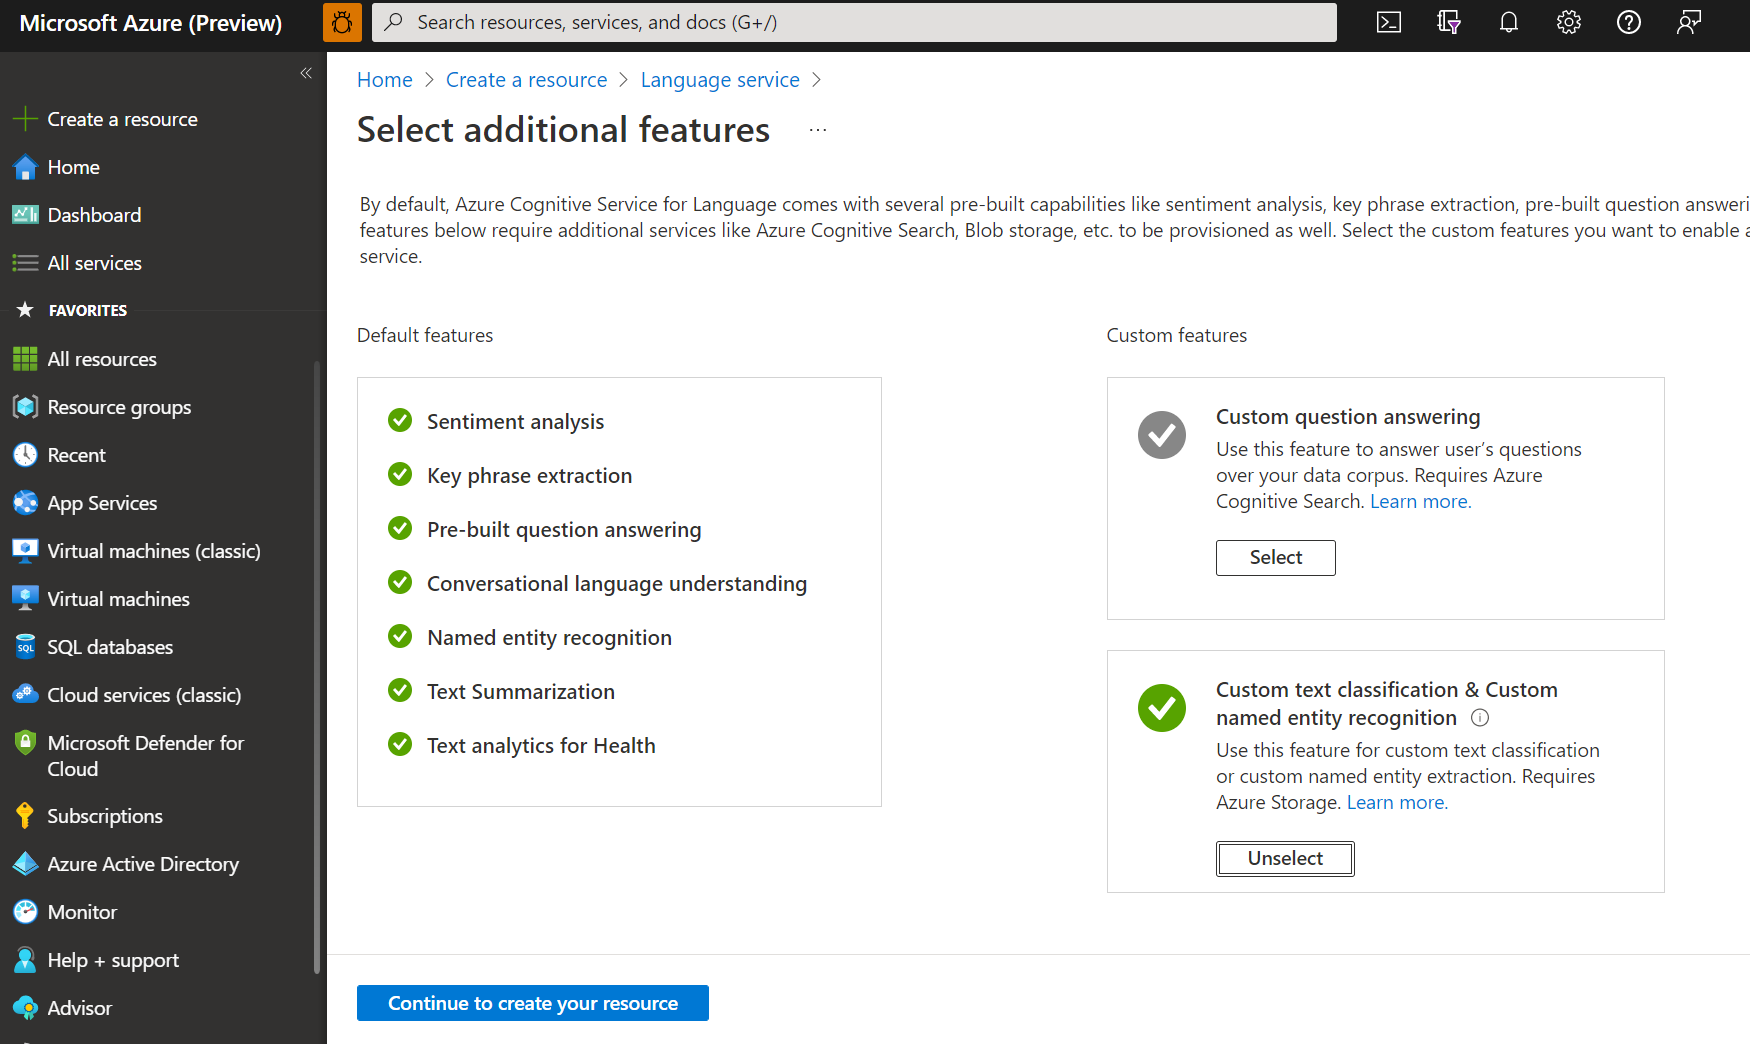 A screenshot showing the selection option for custom text classification and custom named entity recognition in Azure portal.